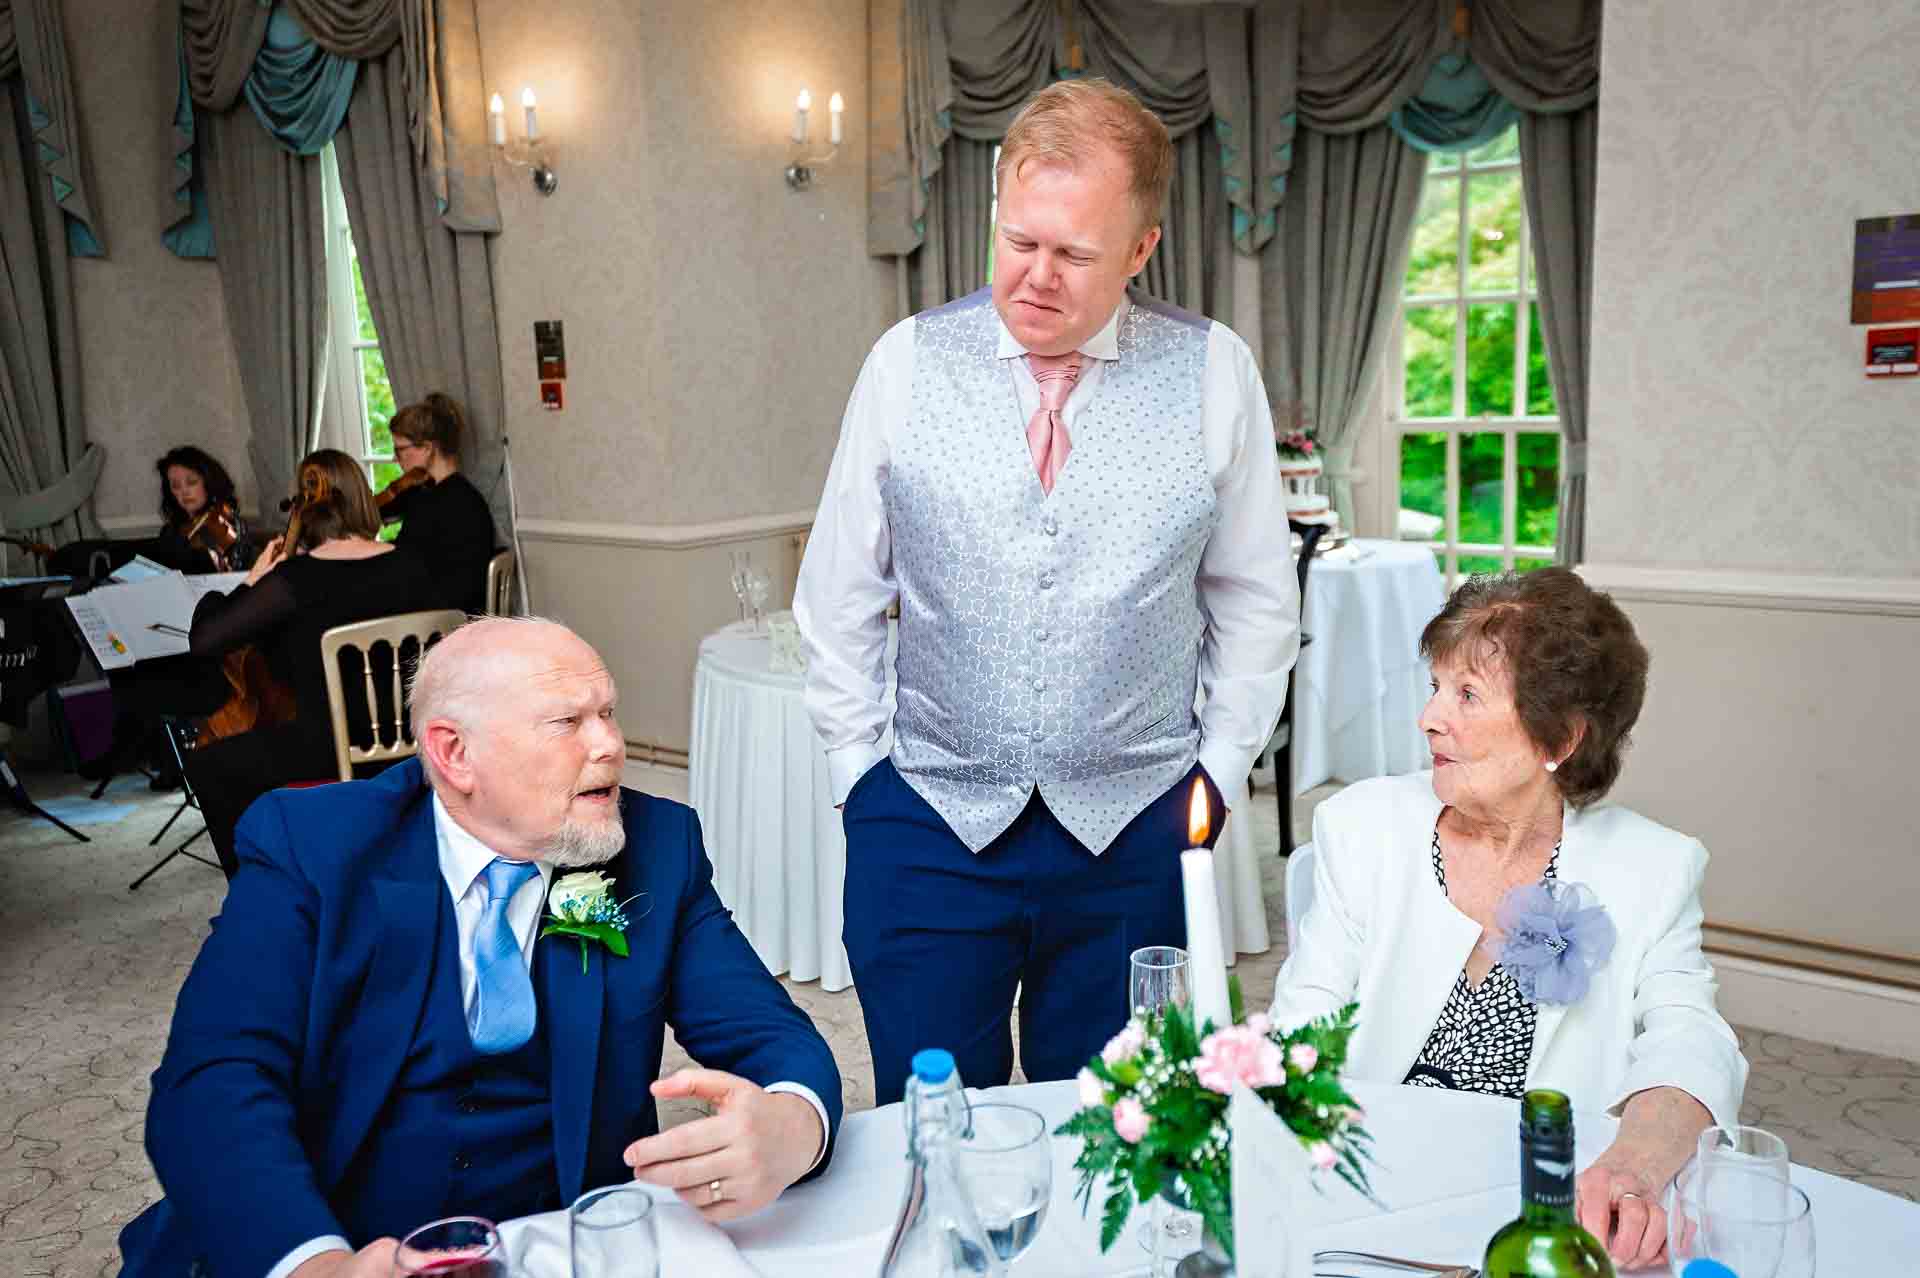 Groom talking to guests at wedding